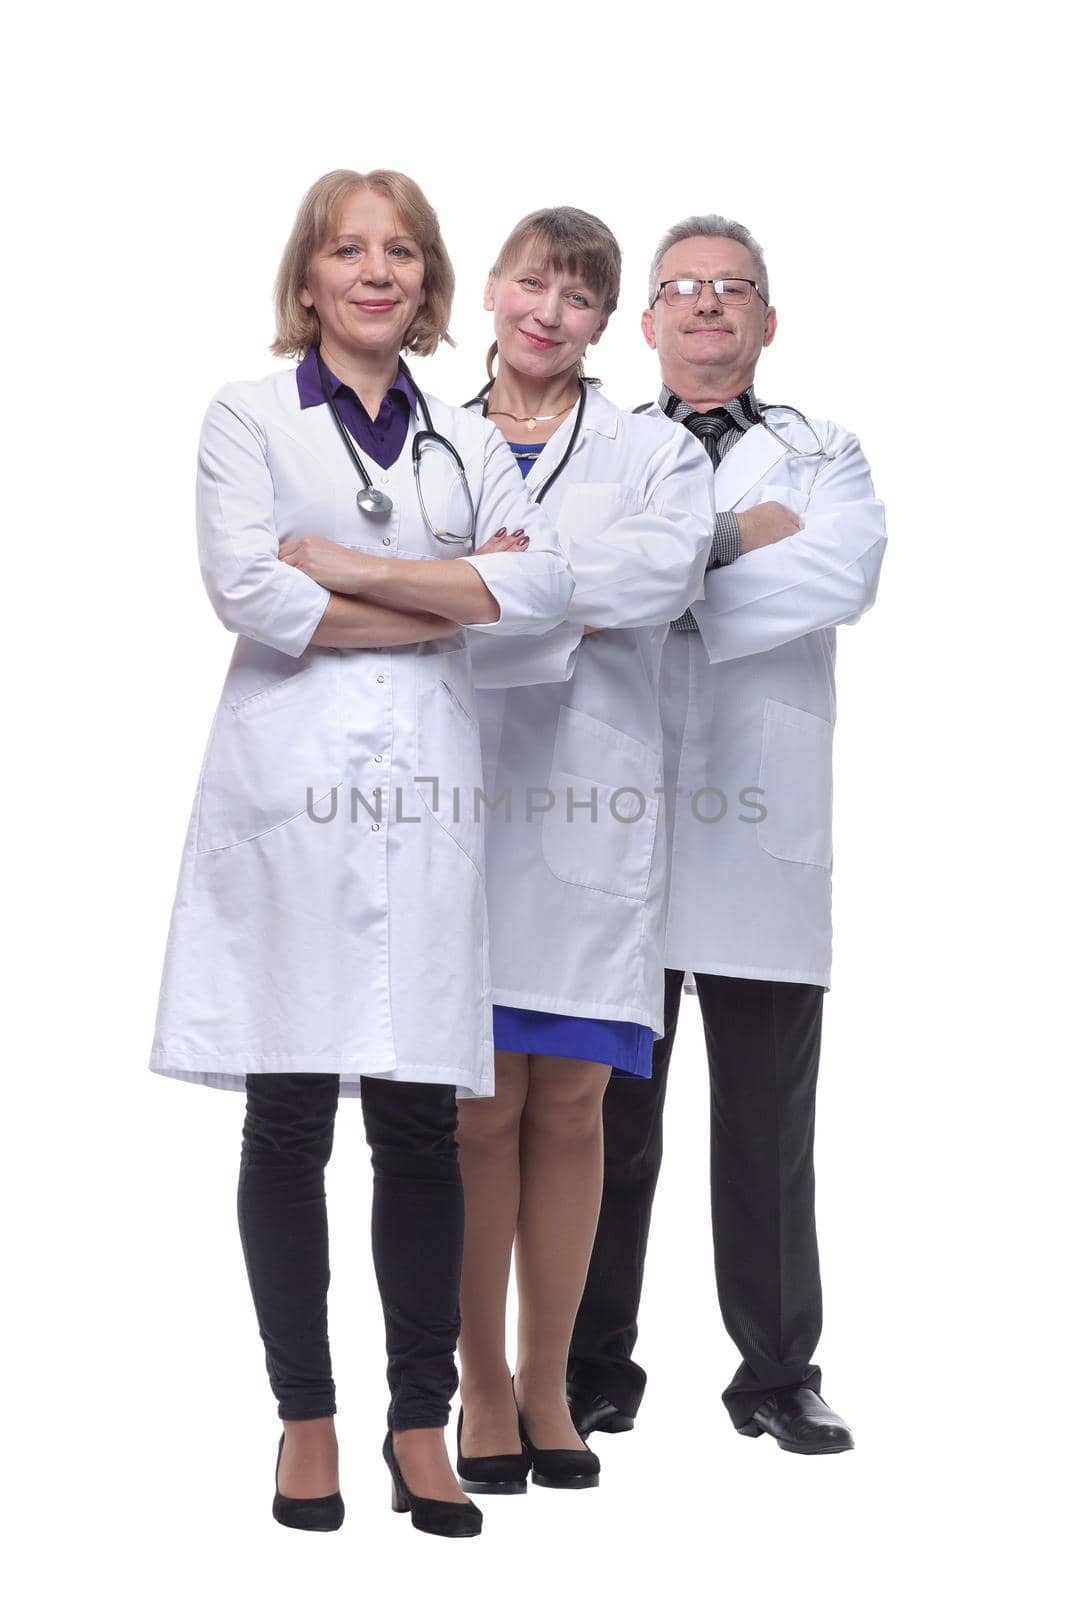 Portrait of group of smiling hospital colleagues standing together isolated over white background